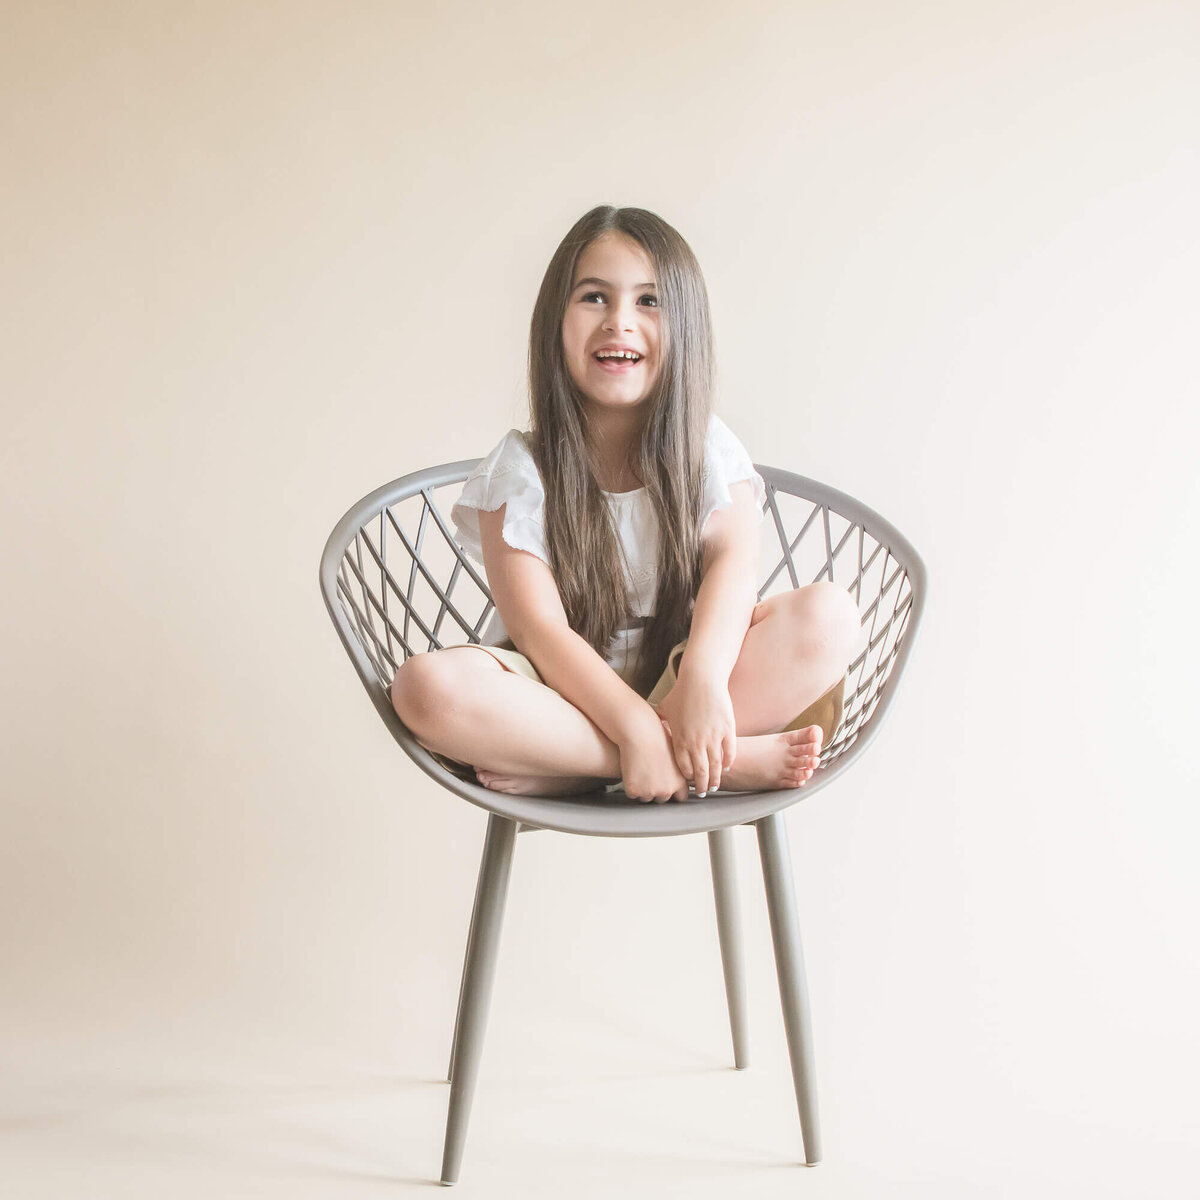 studio portrait of a young girl sitting criss cross applesauce on a grey circular chair with a cream background